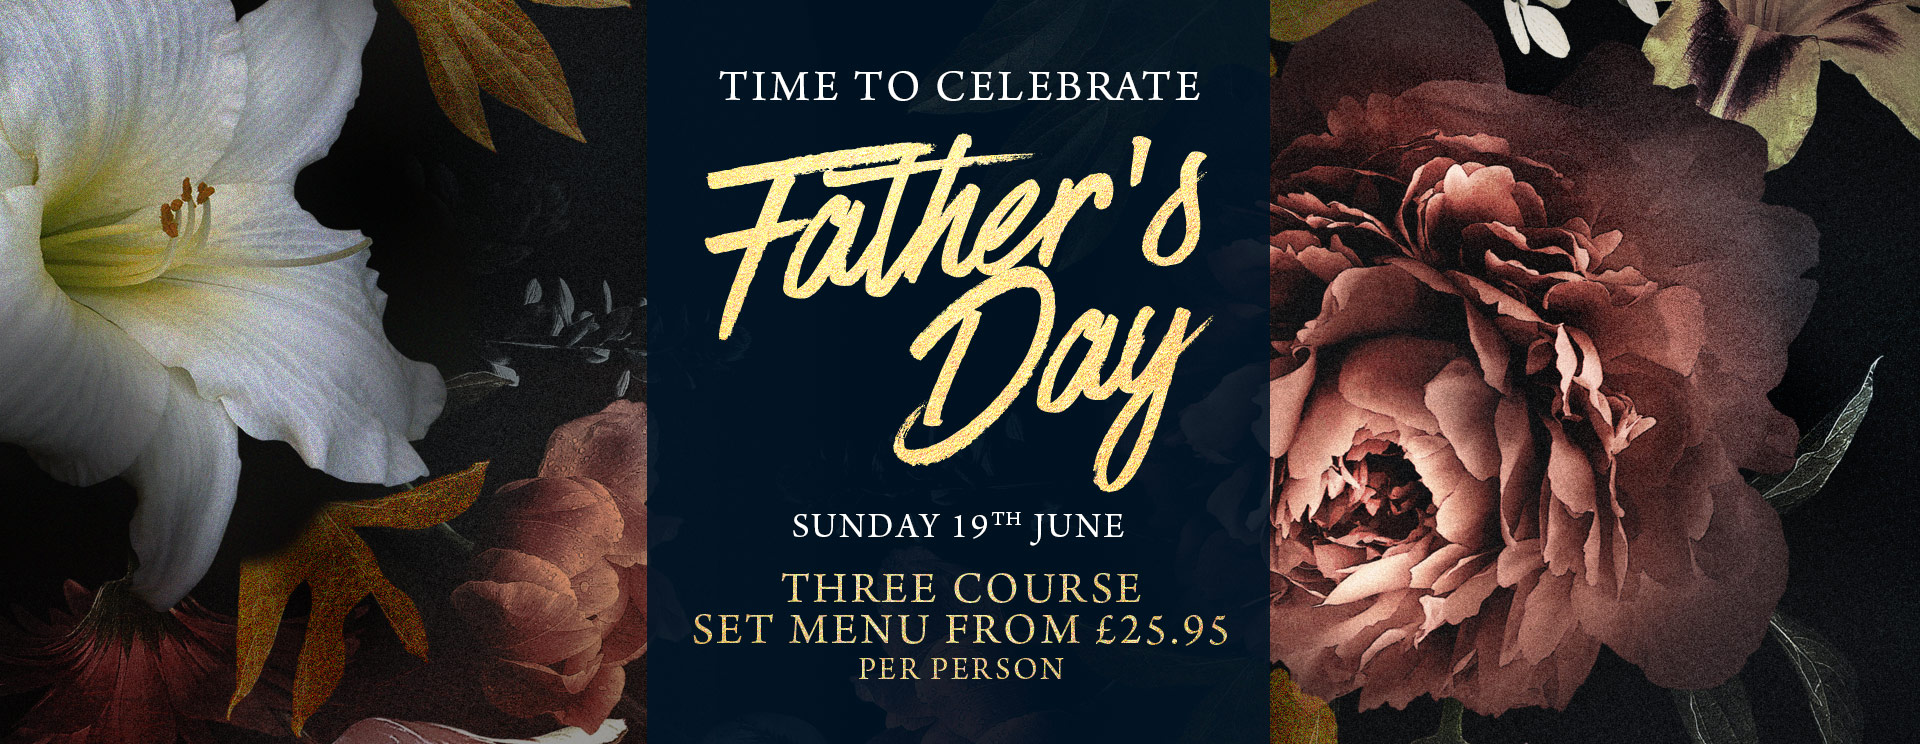 Fathers Day at The Coombe Cellars